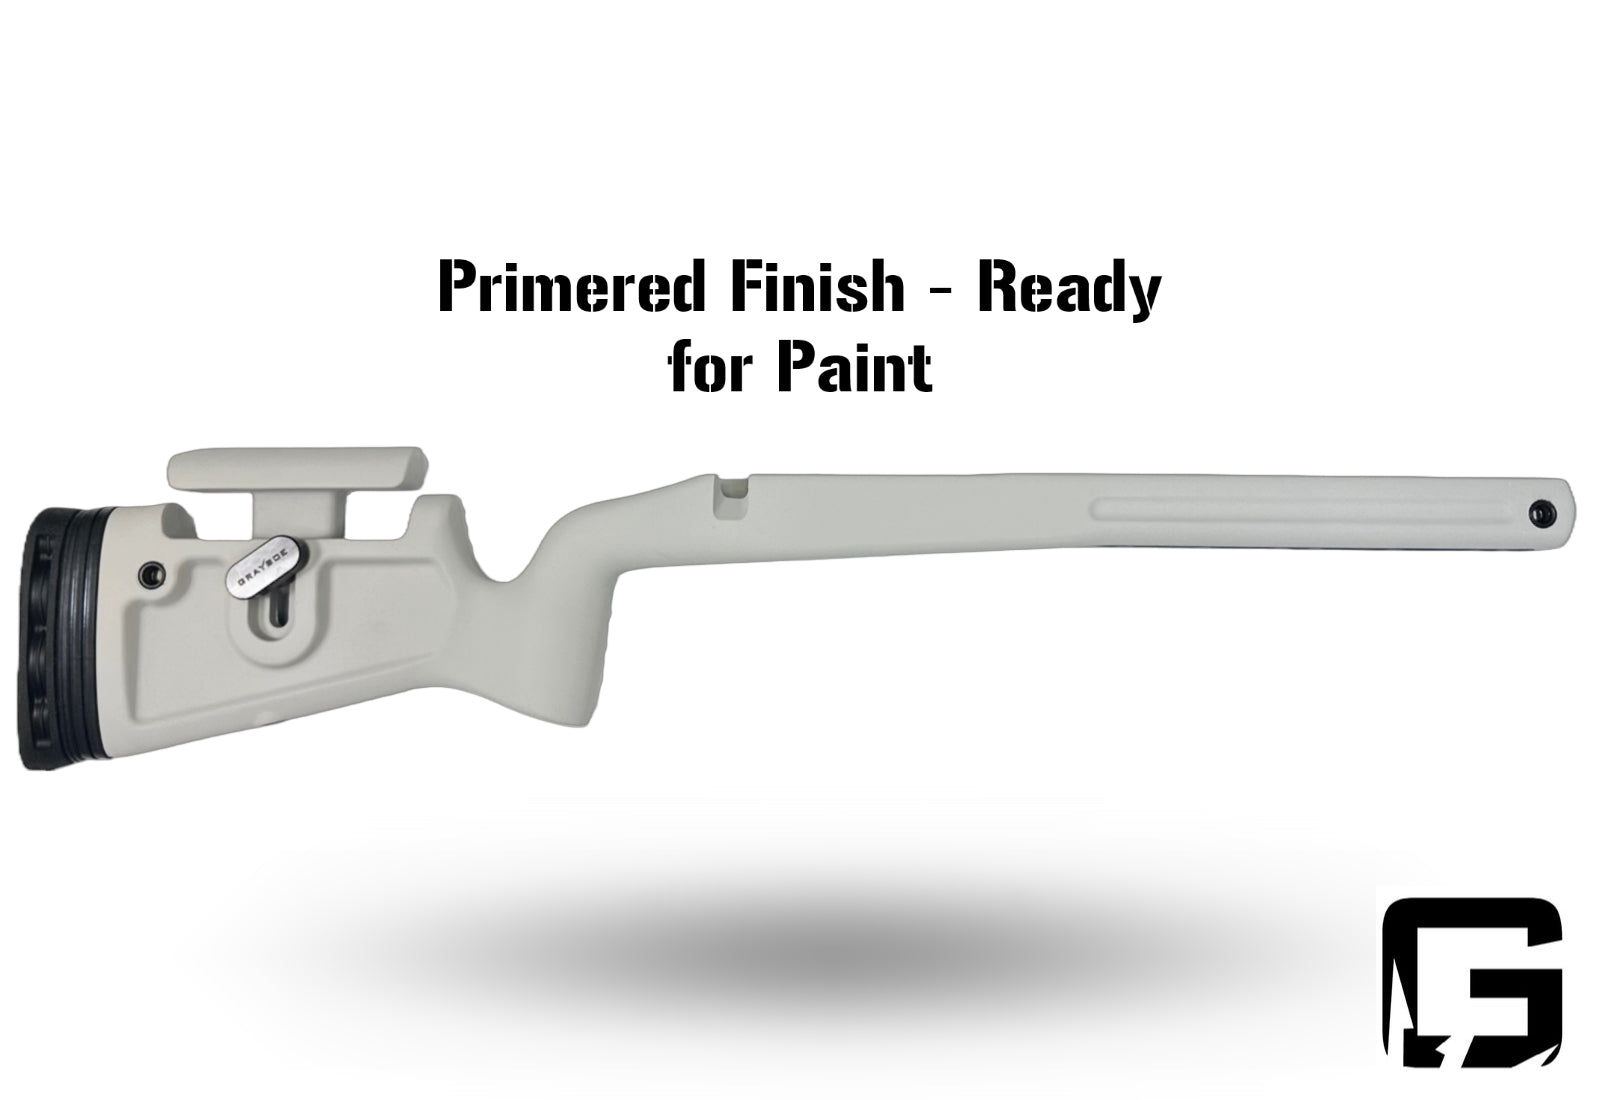 Phoenix 2 - Right Hand Rem 700 or 700 clone Long action, M5, Fits any barrel.  Primer Finish